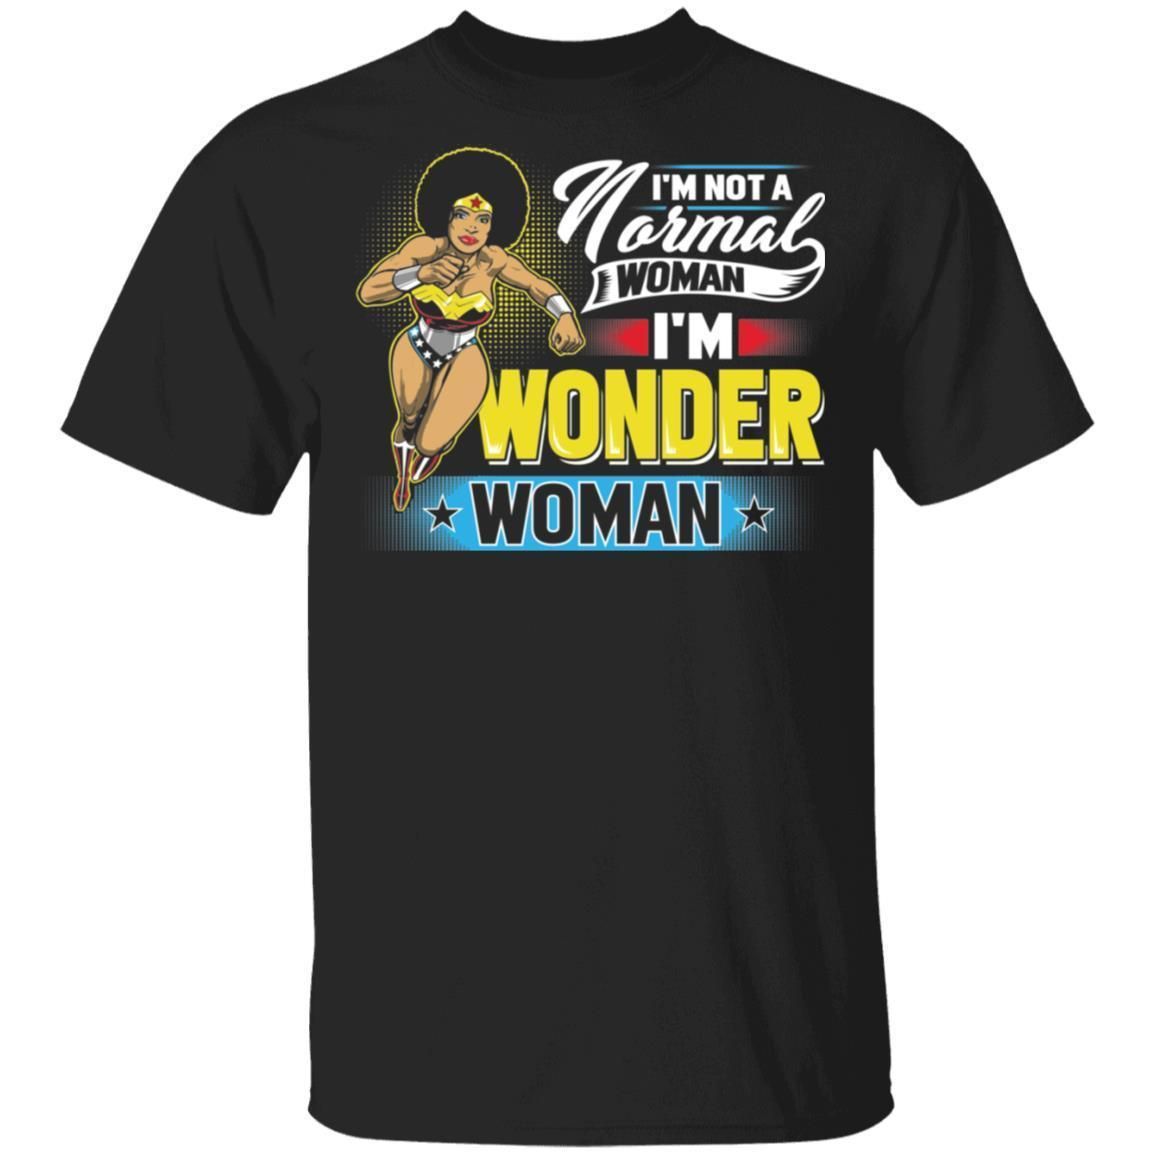 I'm Not A Normal Woman. I'm WW Hoodie